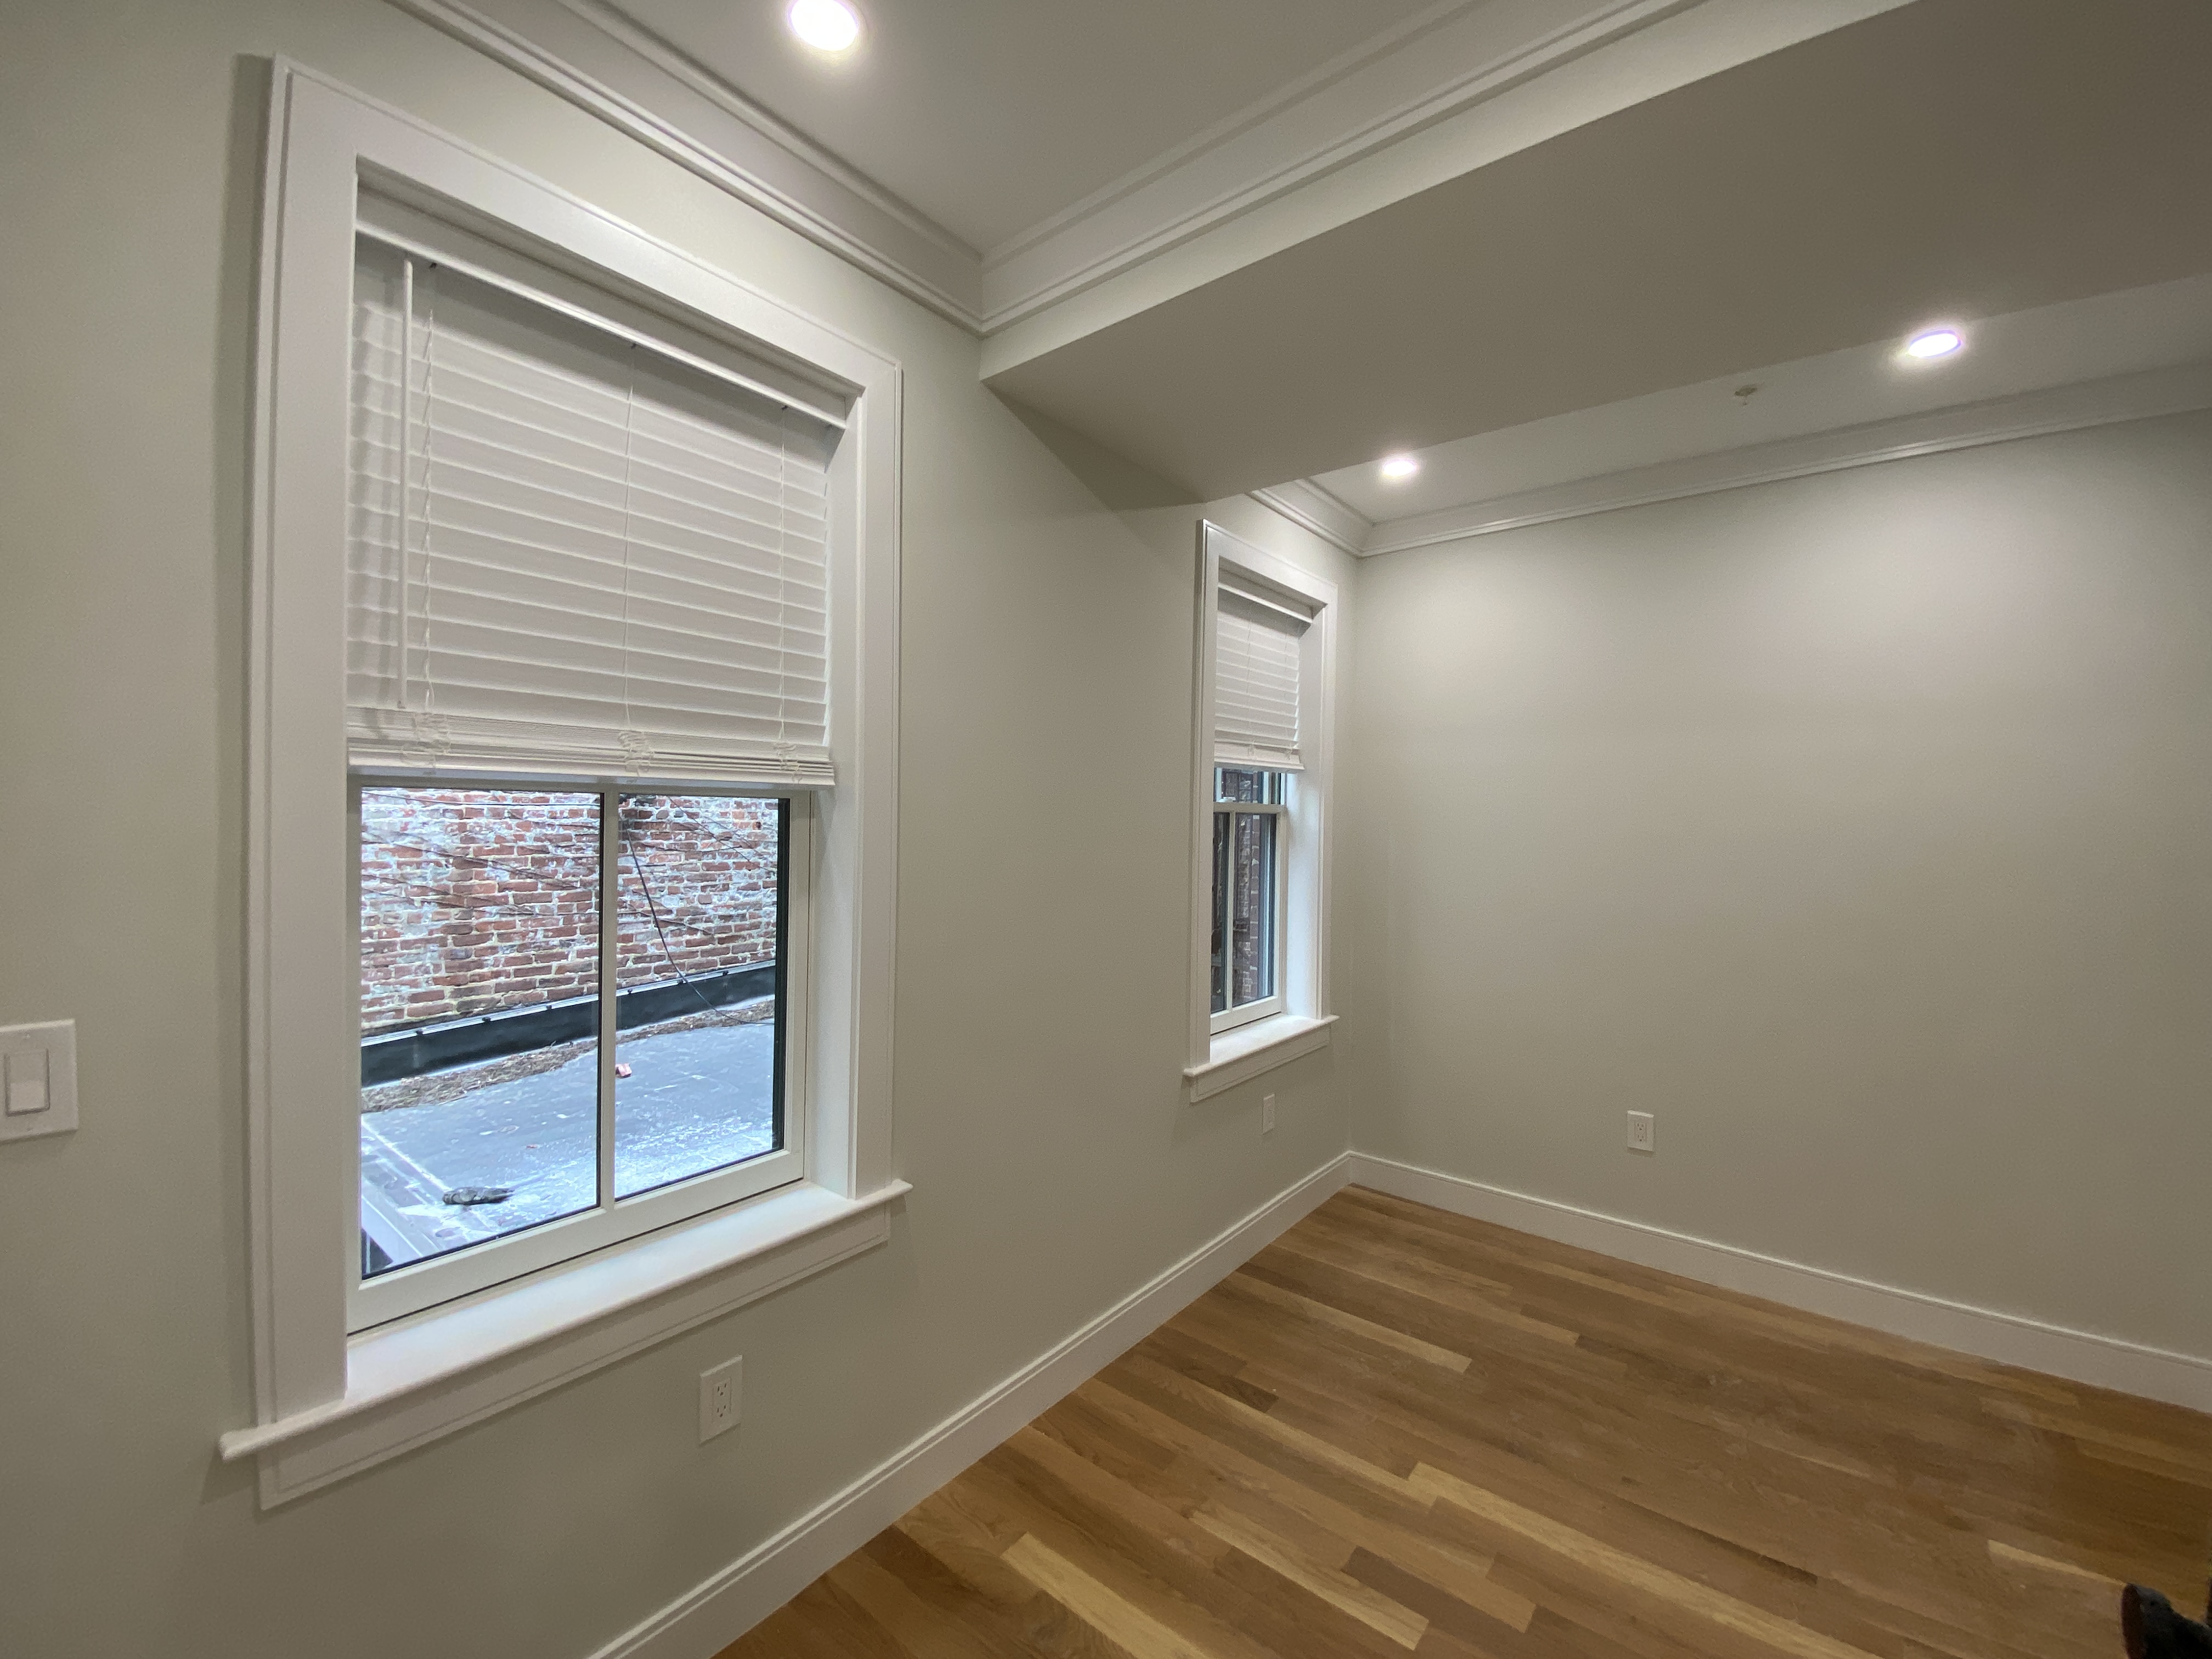 Pictures of  property for rent on Grove St., Boston, MA 02114